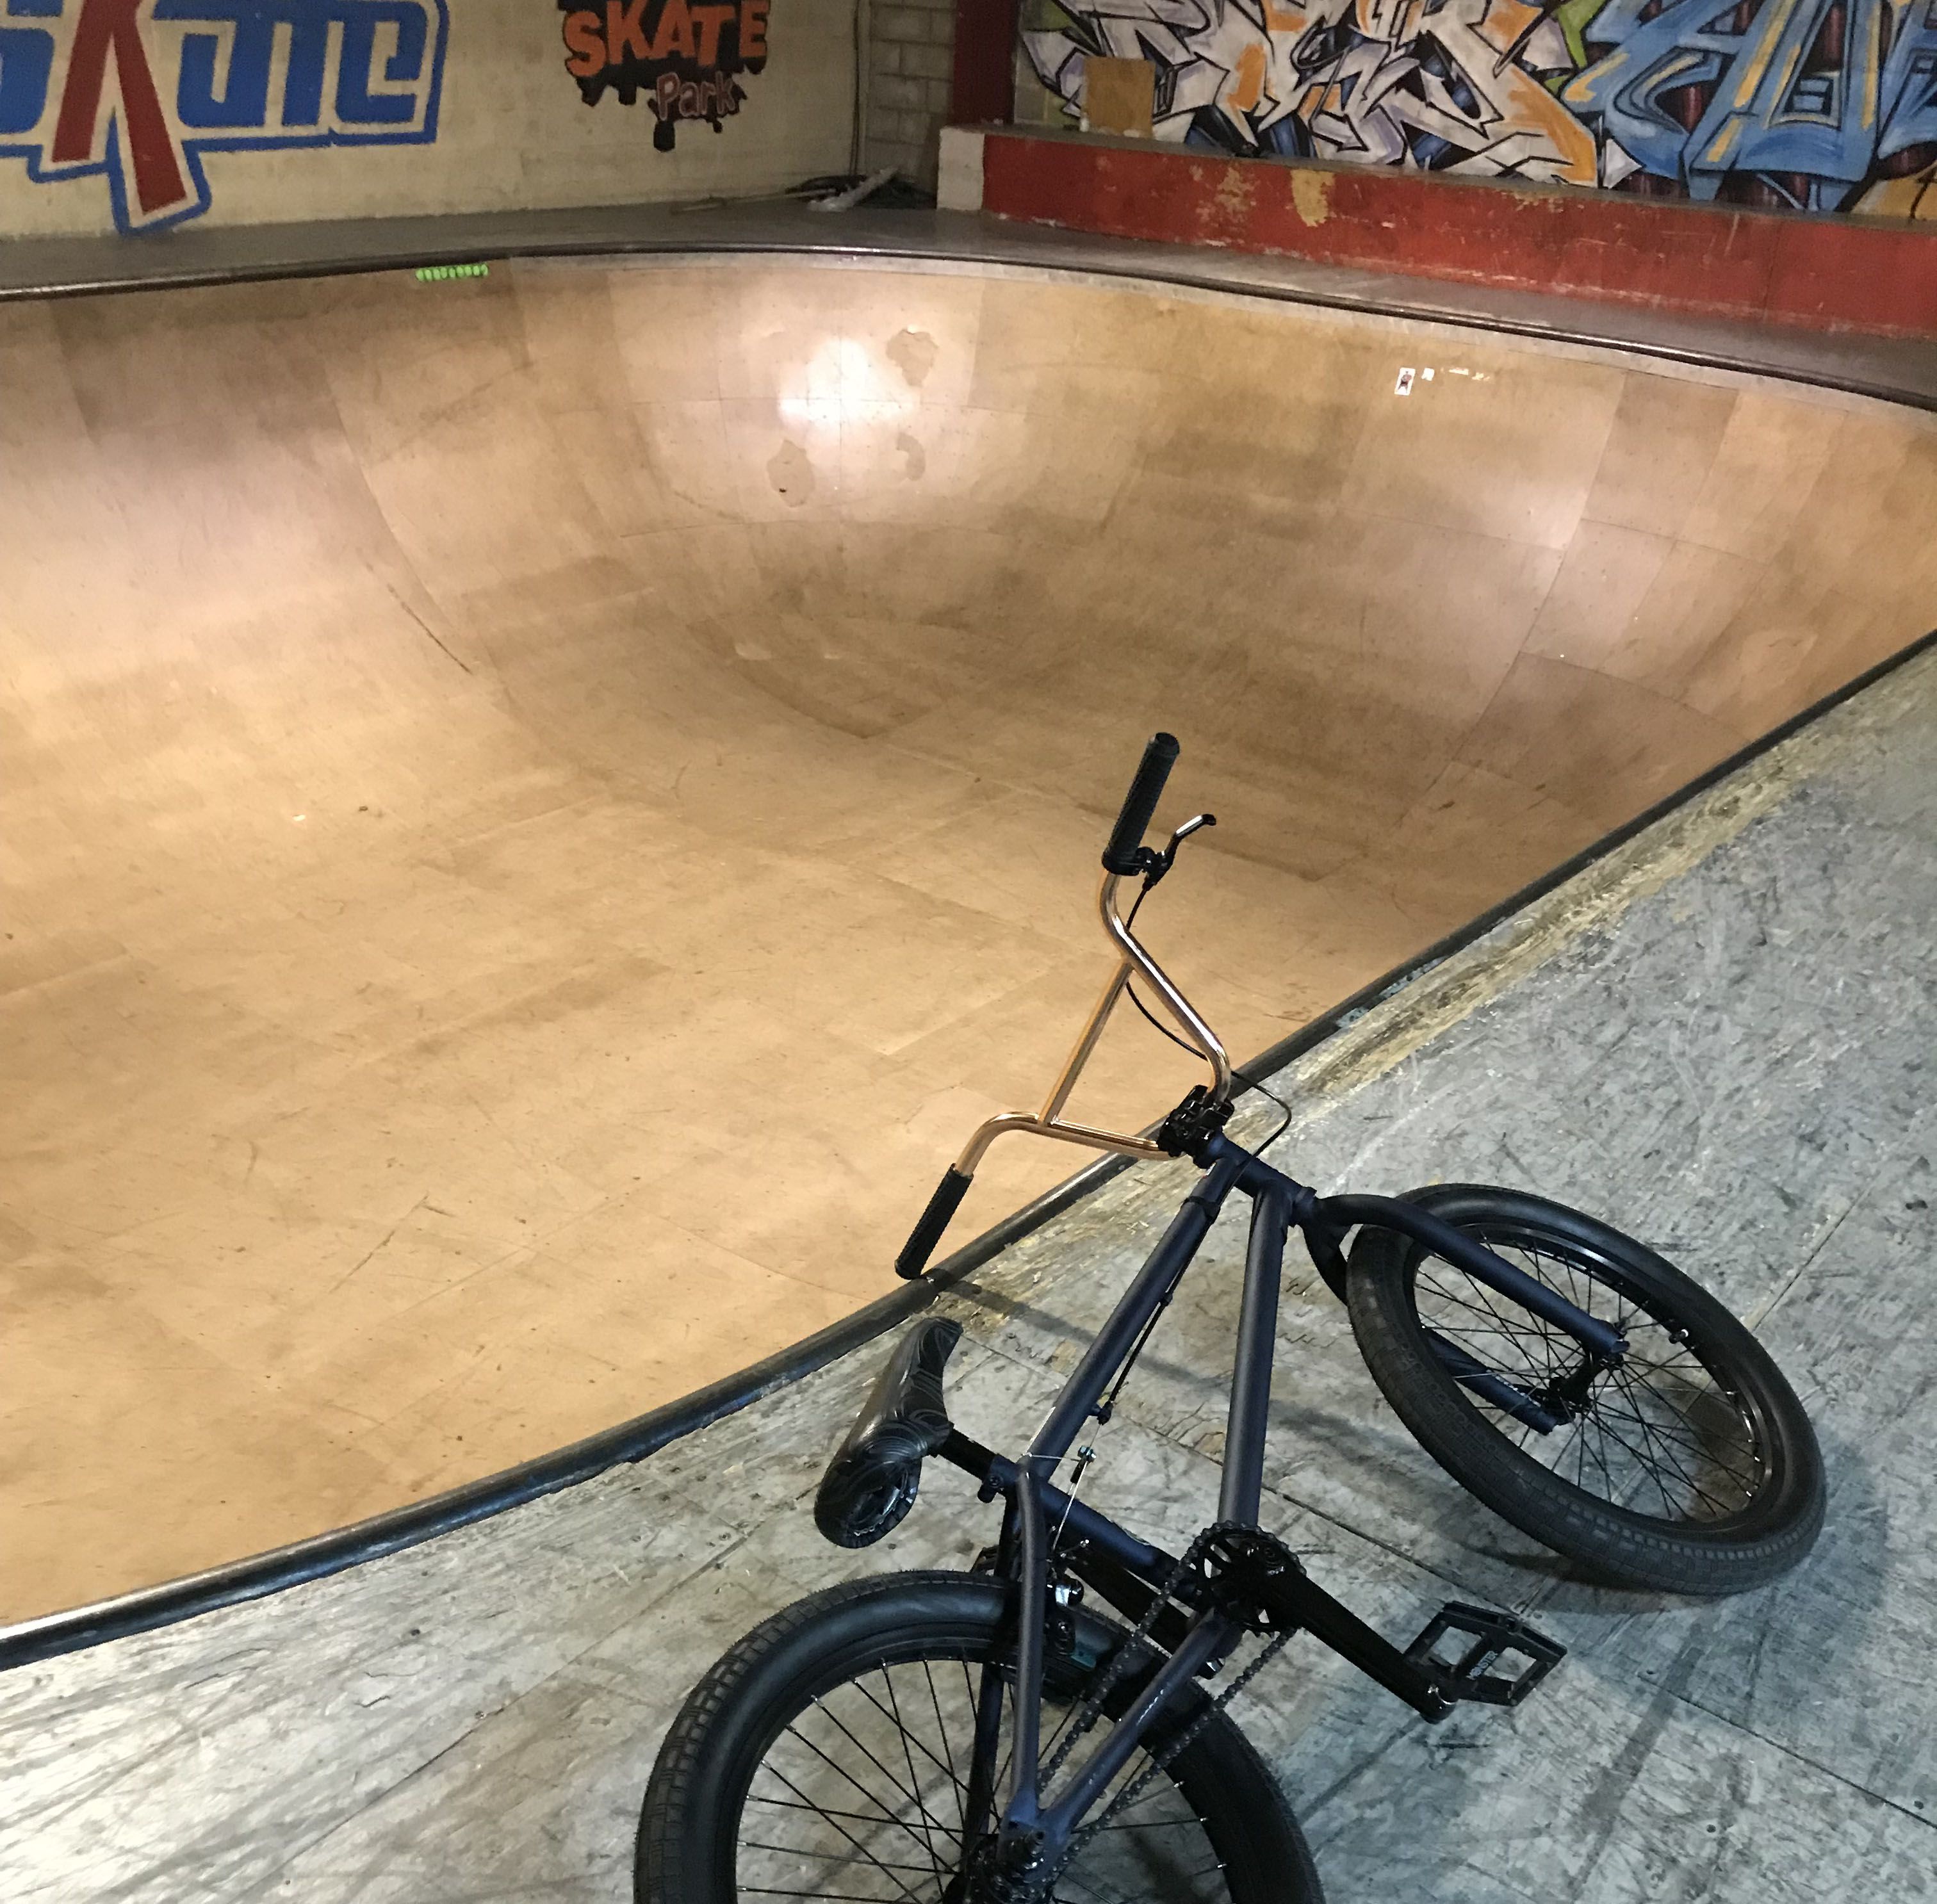 riding a bmx bike for exercise